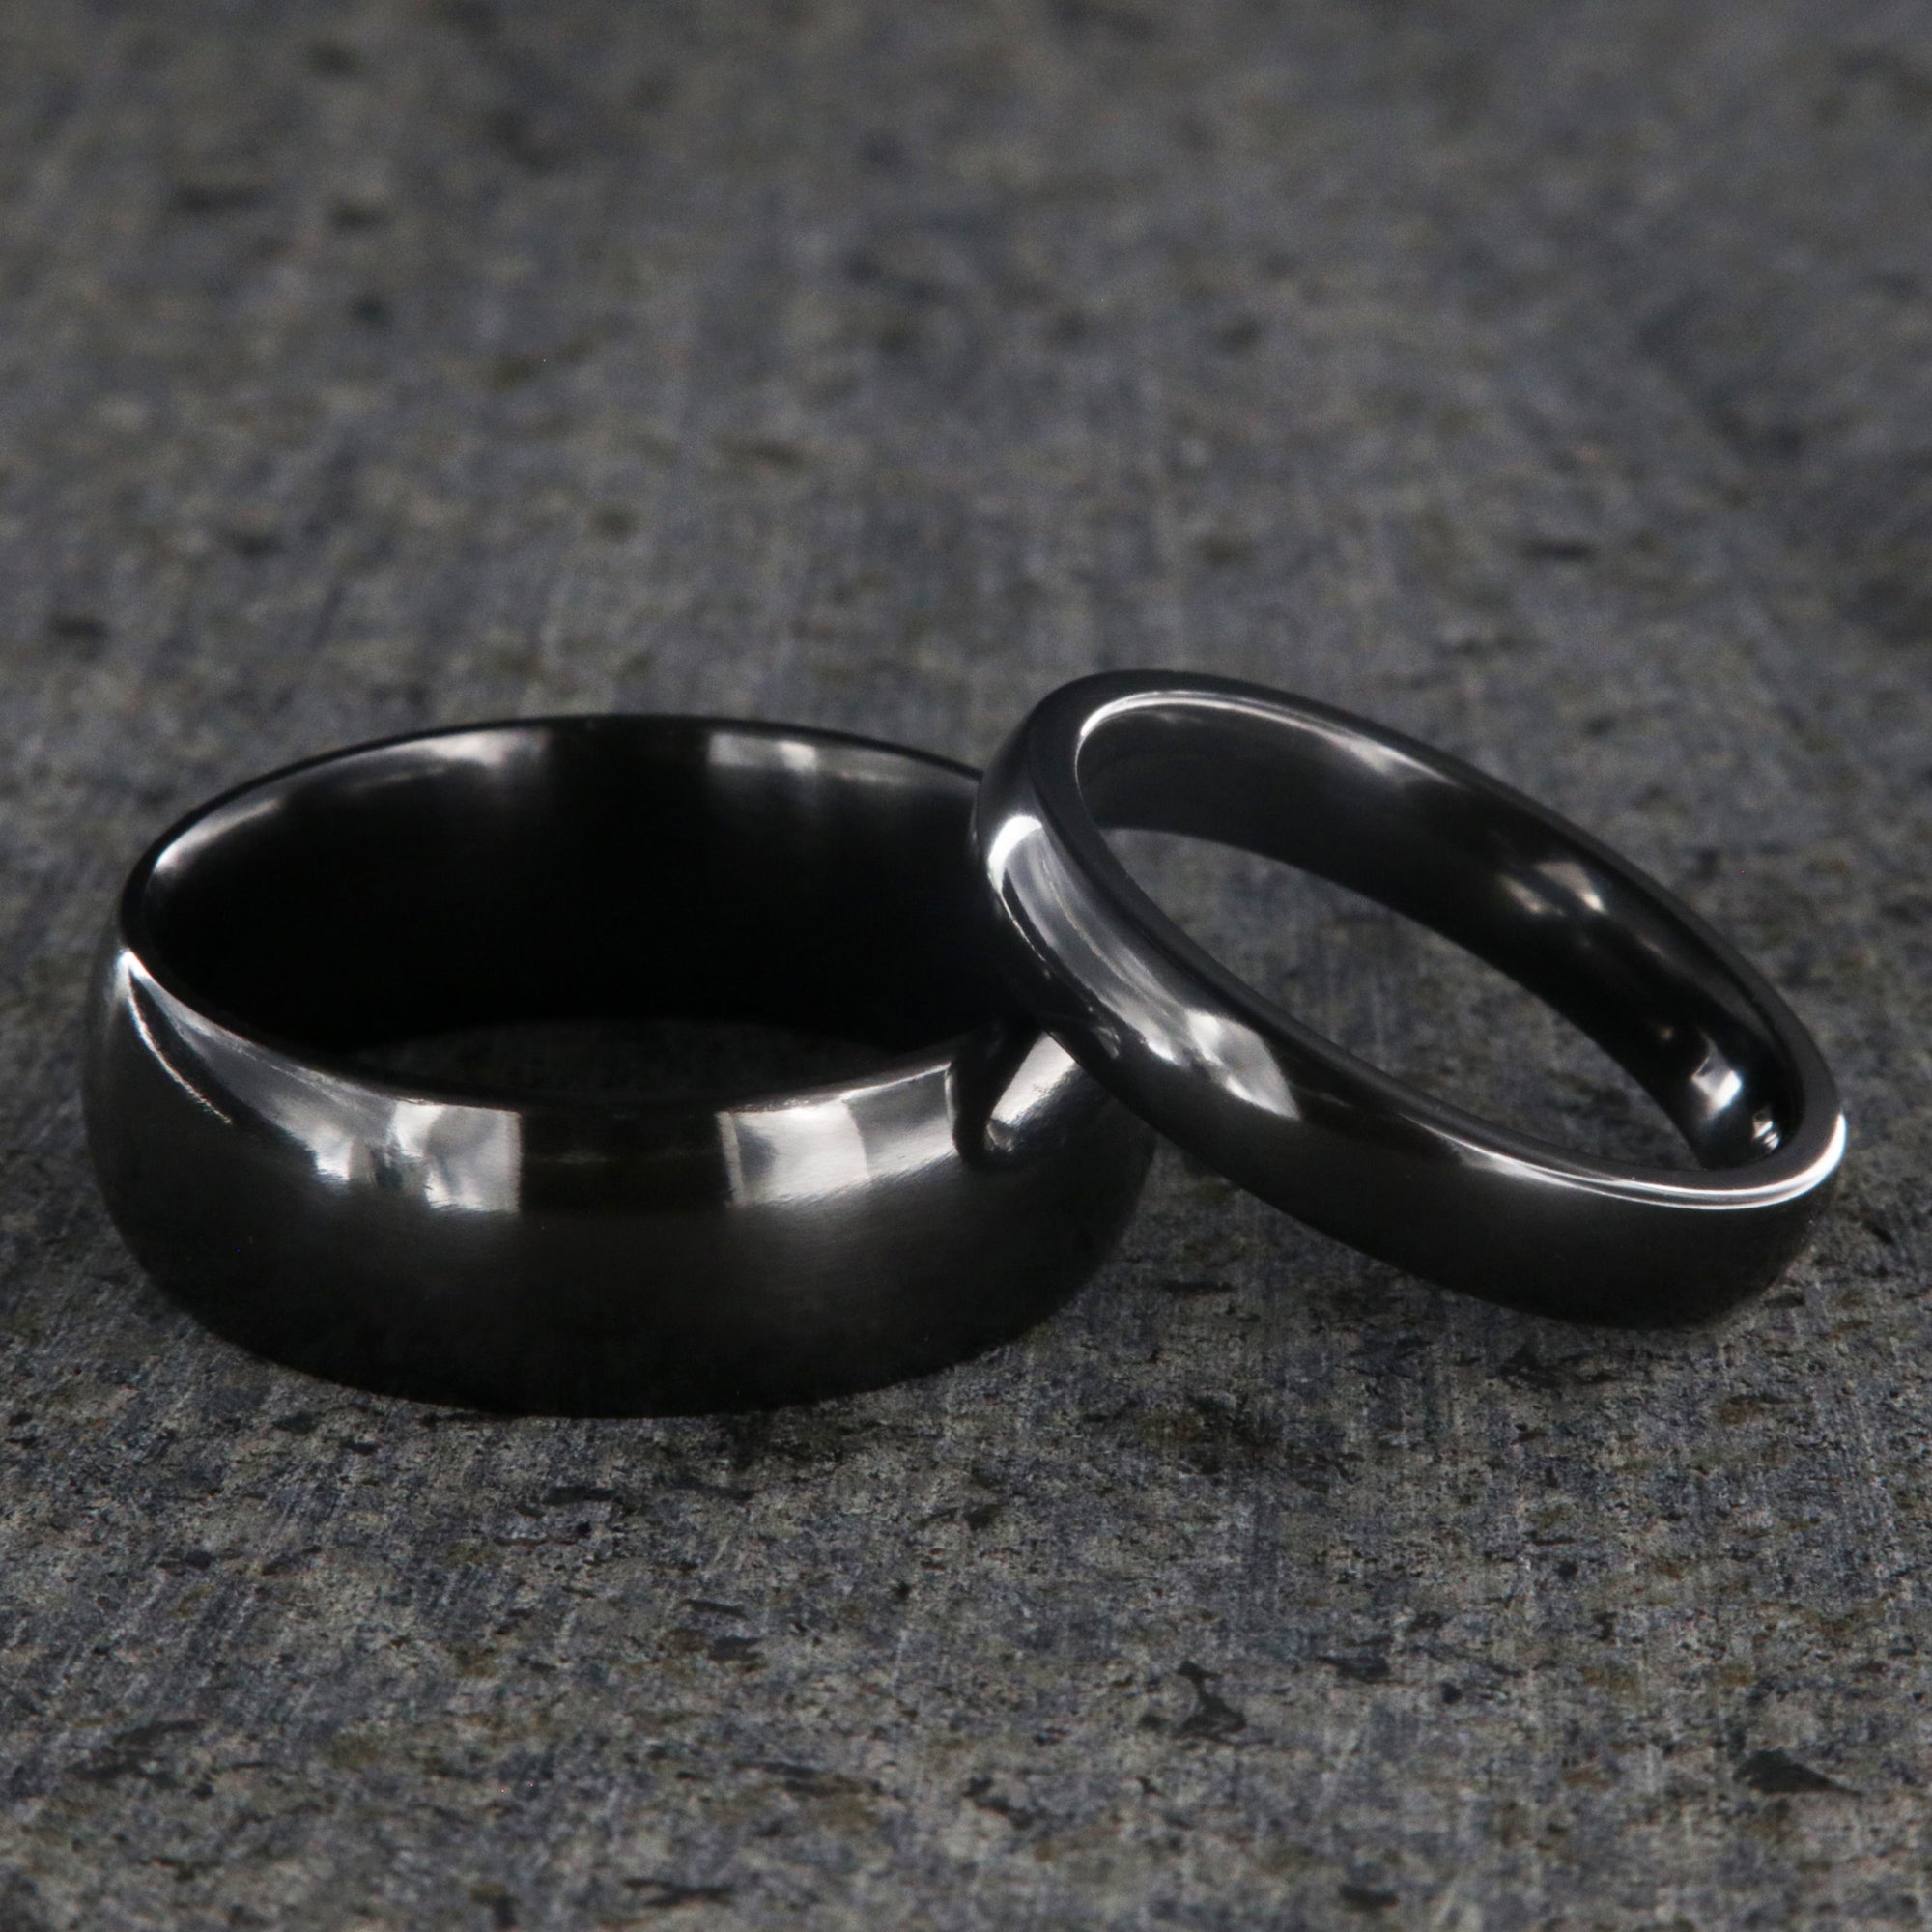 8mm and 4mm wide matching black zirconium wedding ring set with a polished finish and rounded profile